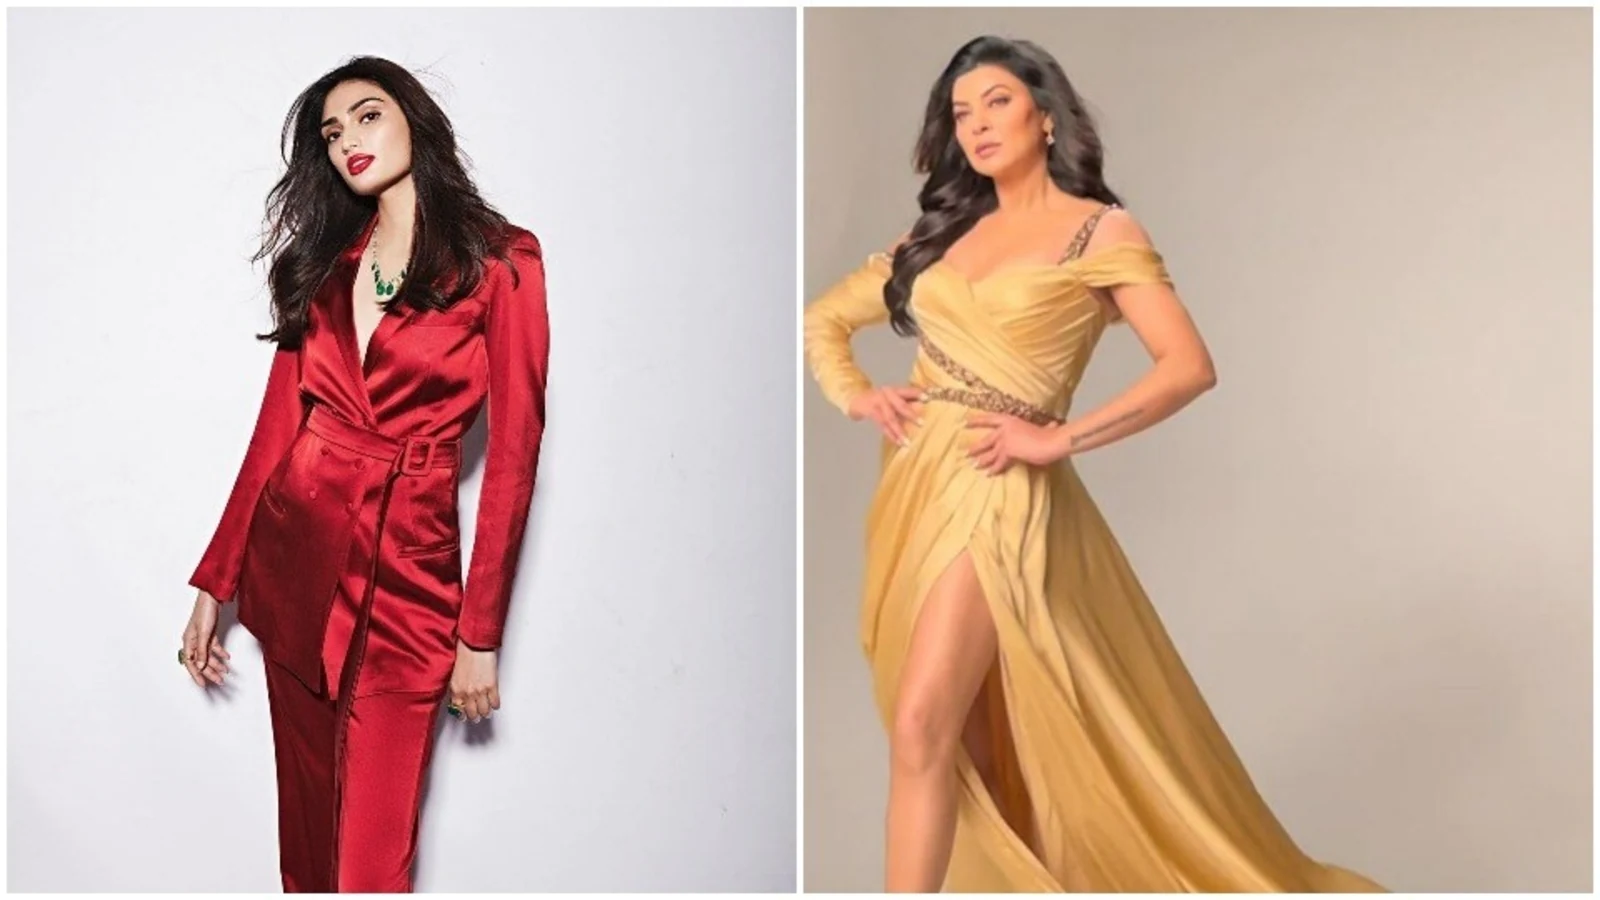 Athiya Shetty looked up to Sushmita Sen growing up: ‘I used to mimic her’